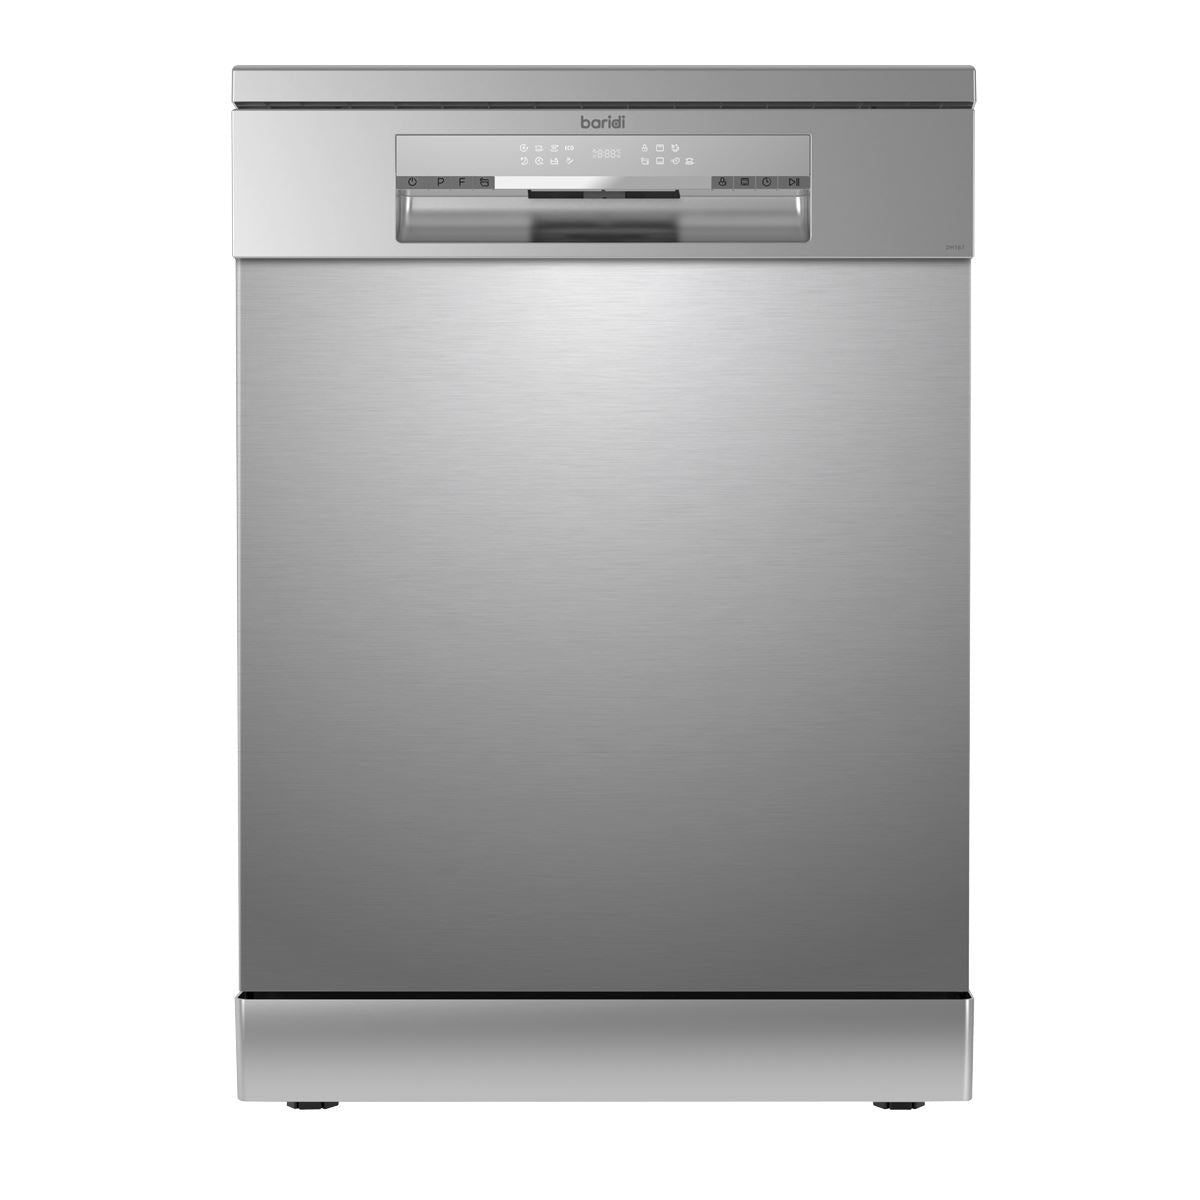 Baridi Freestanding Dishwasher, Full Size, Standard 60cm Wide with 14 Place Settings, 8 Programs & 5 Functions, LED Display, Silver